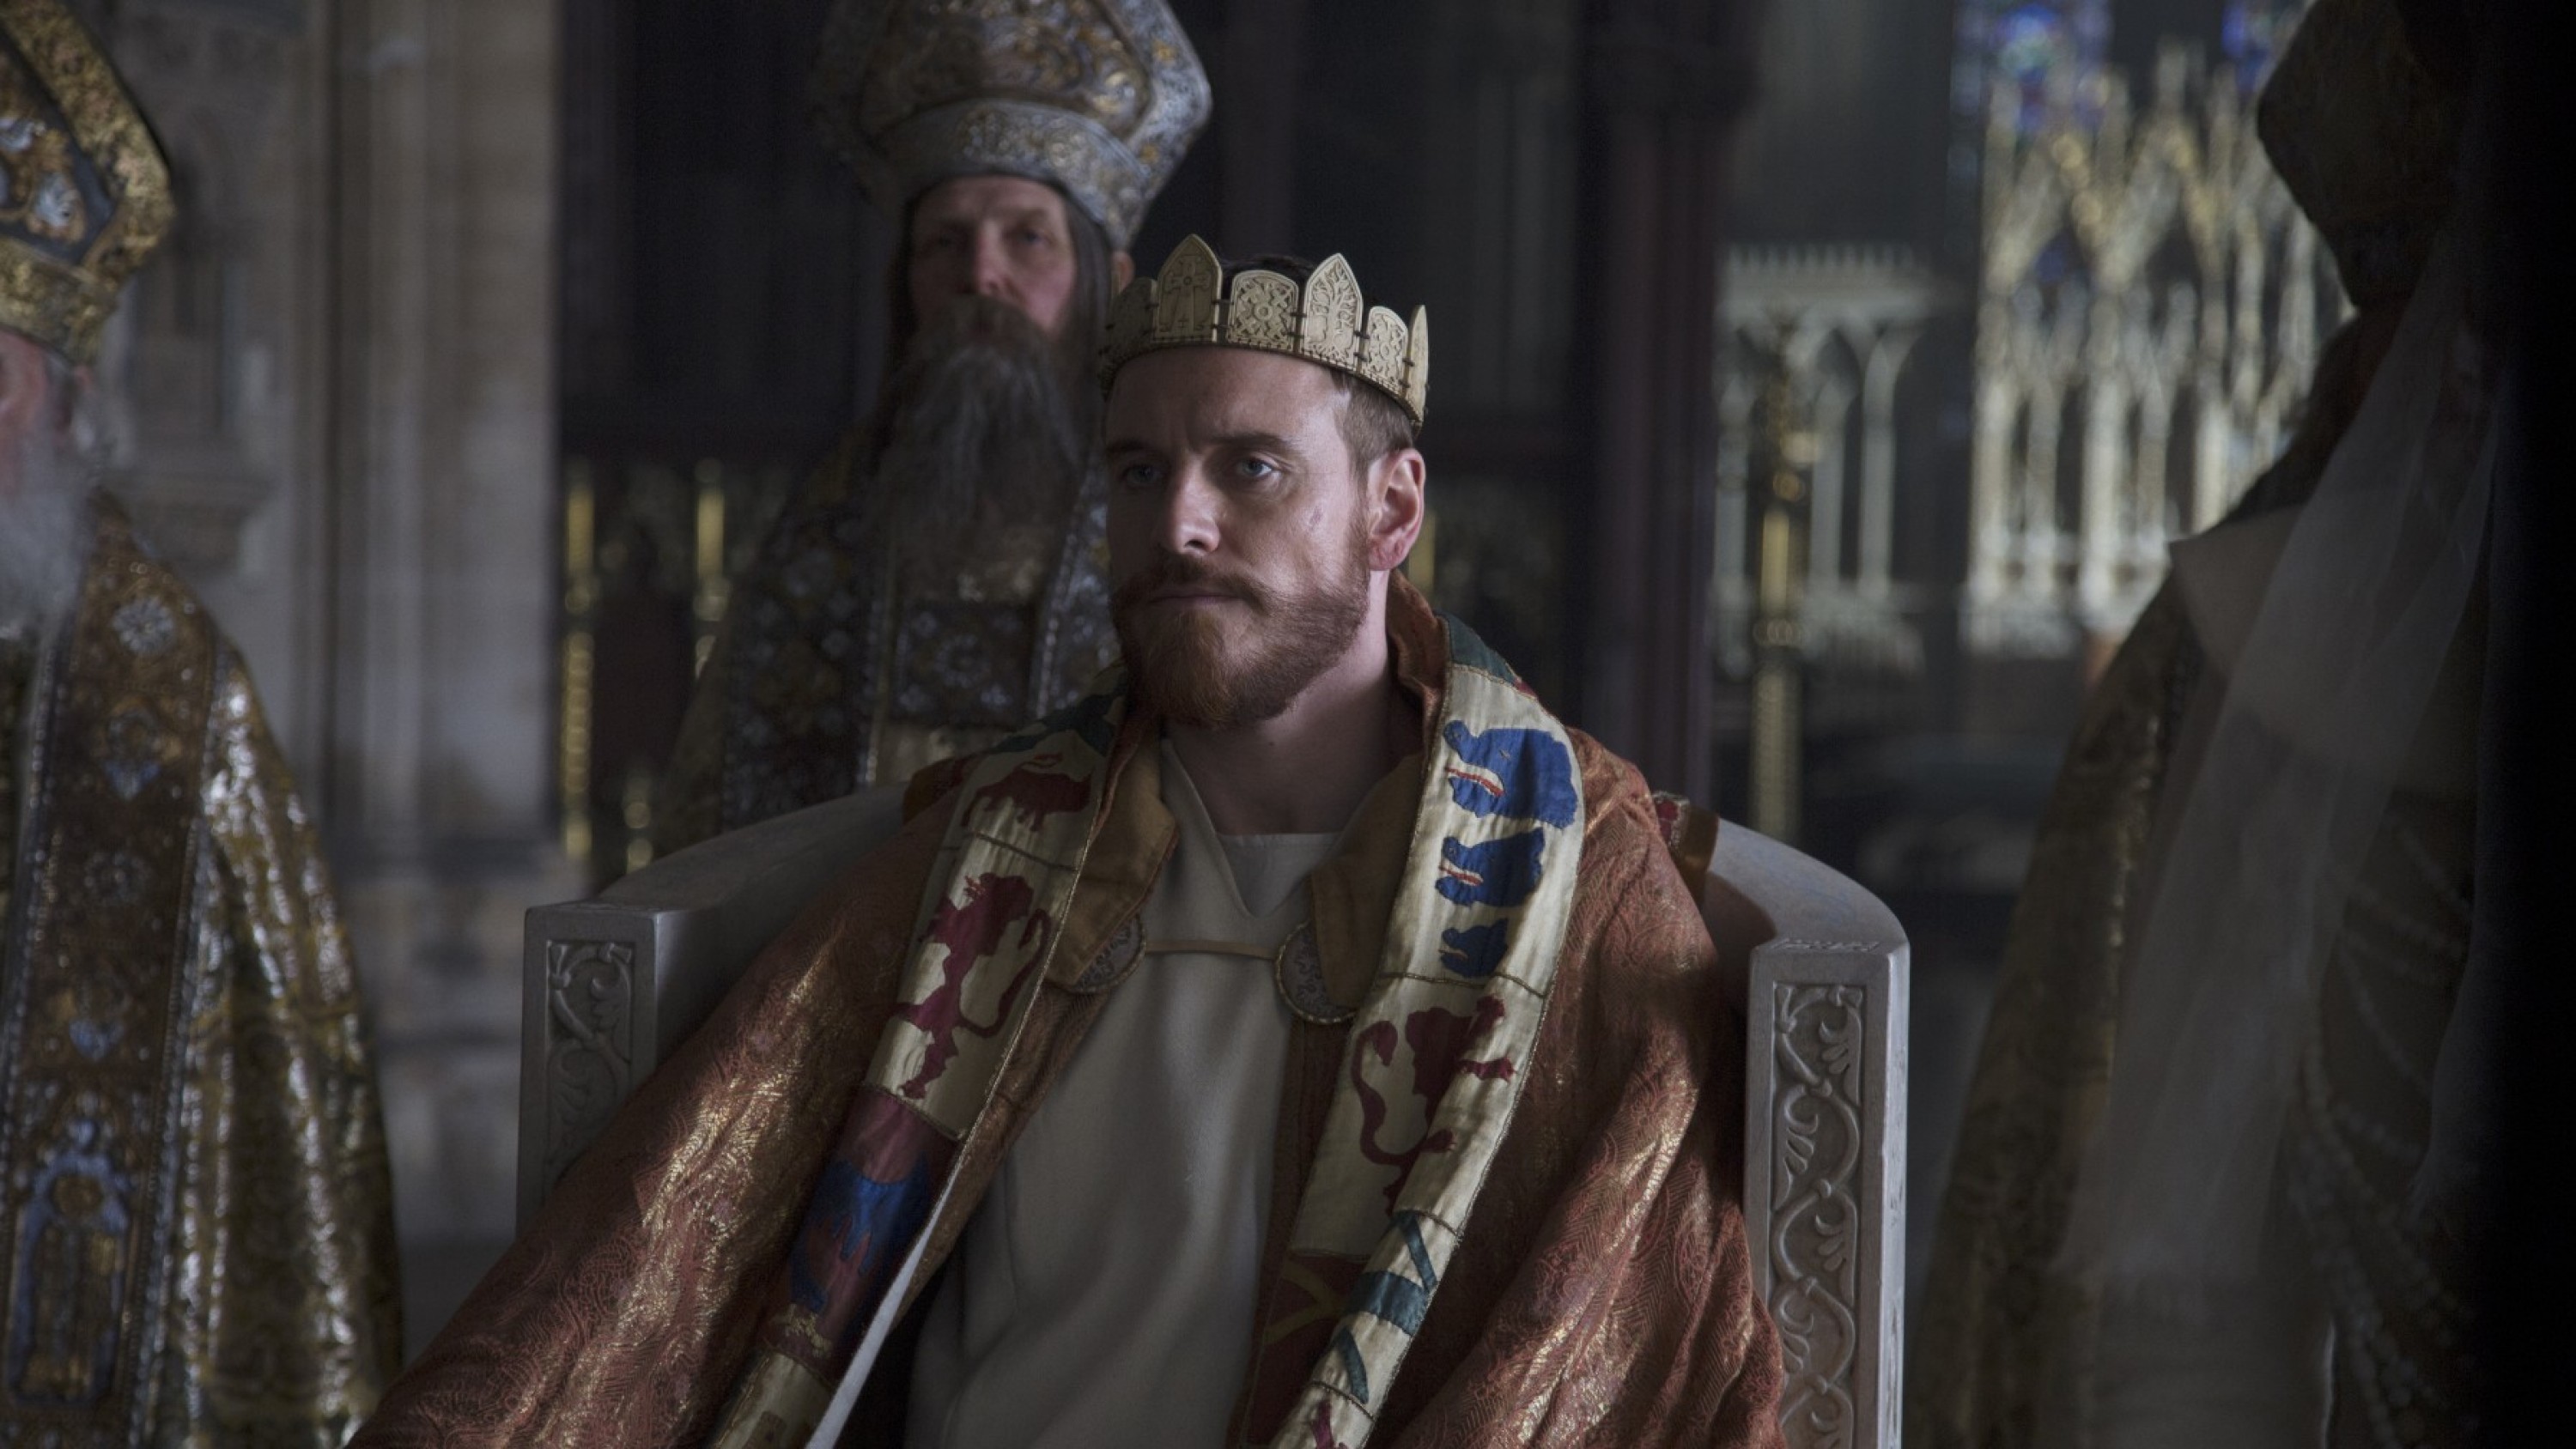 A film guide that looks at Macbeth (2015). thumbnail